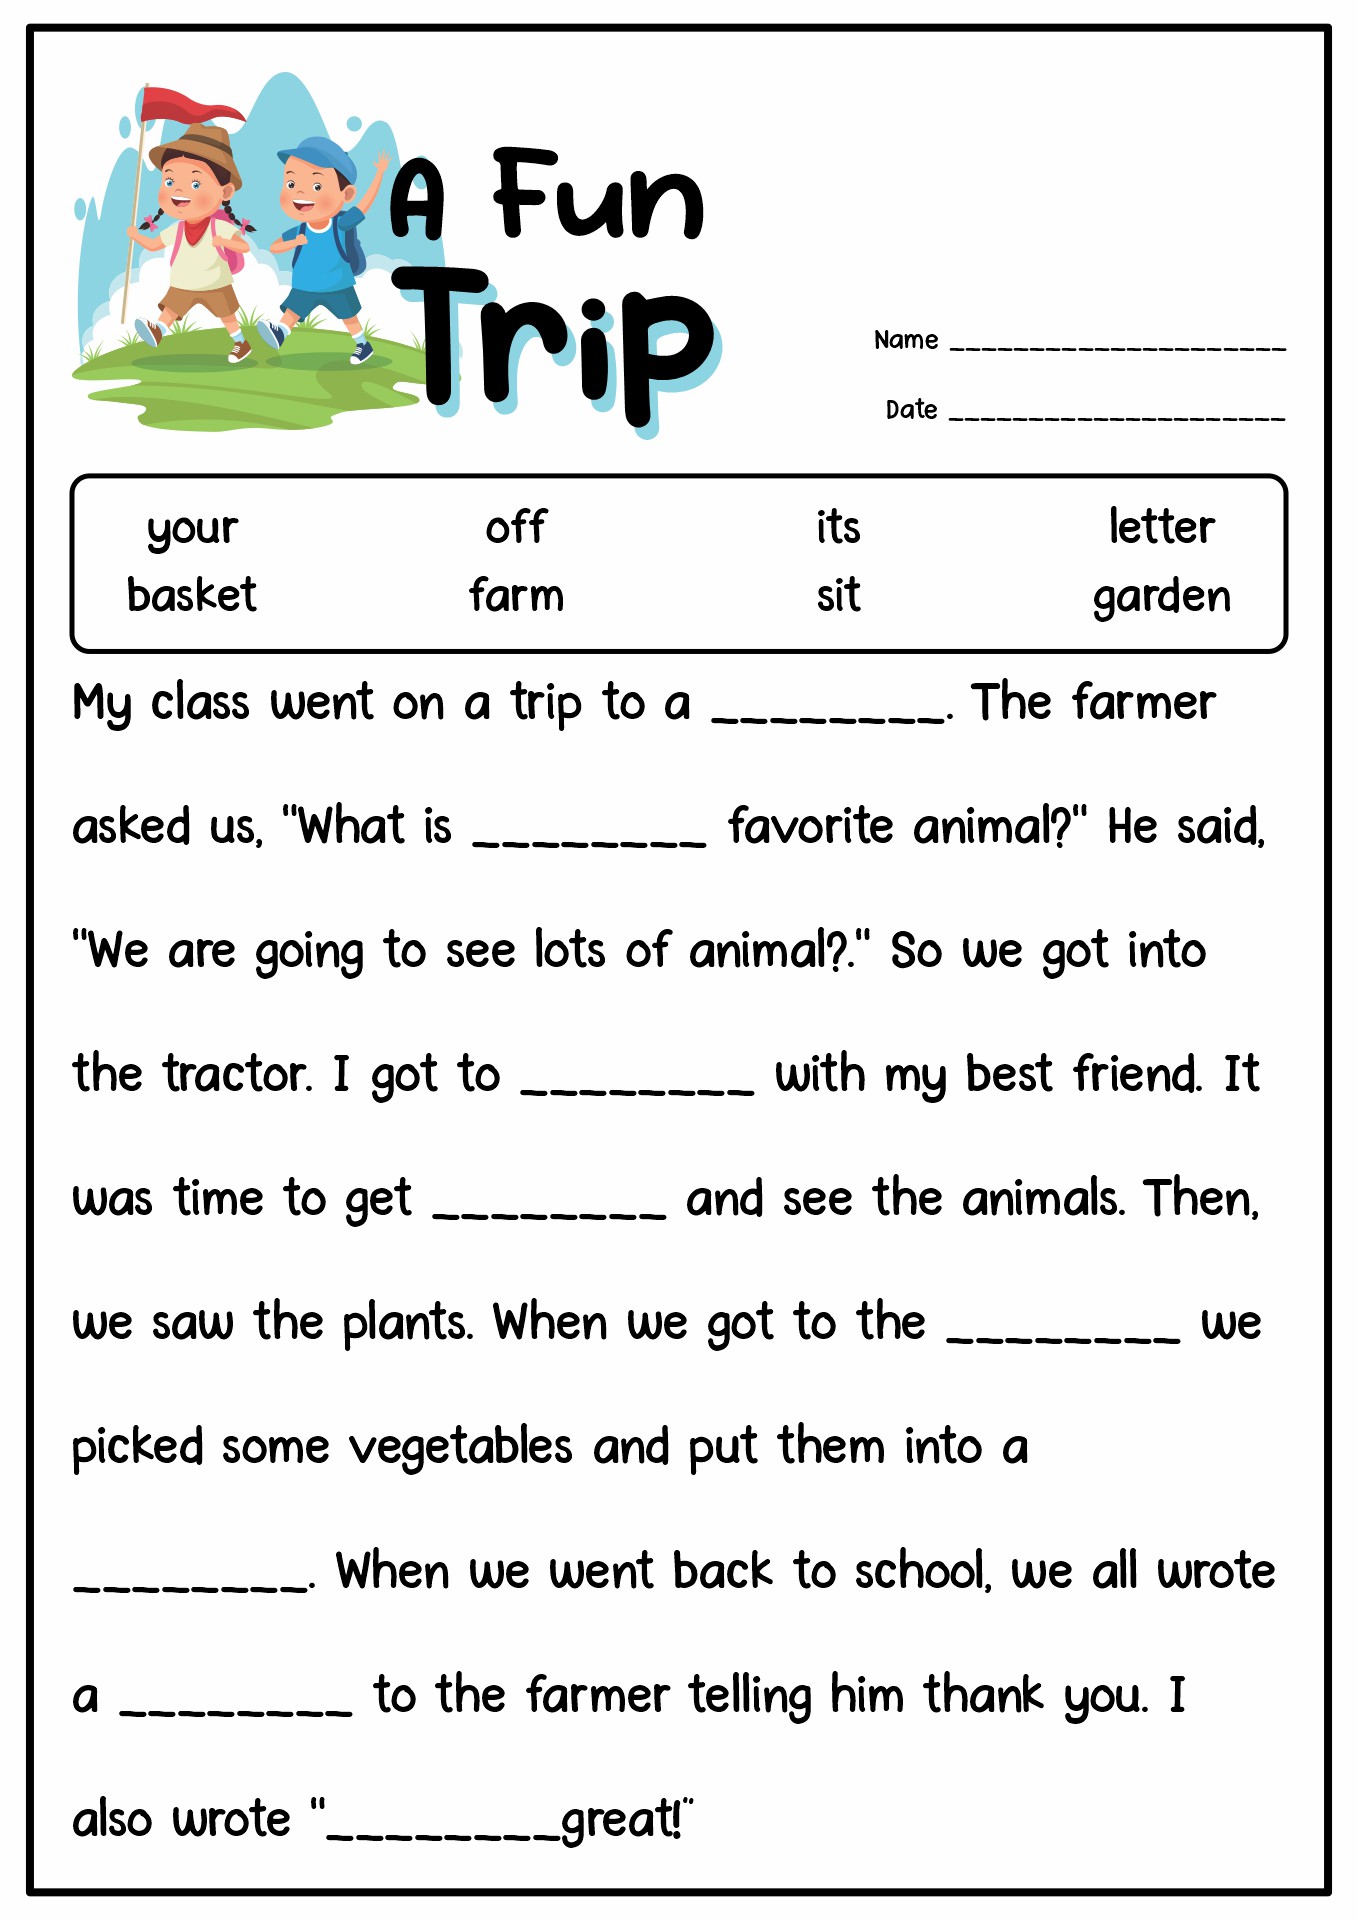 1st Grade Fill in the Blank Stories Image